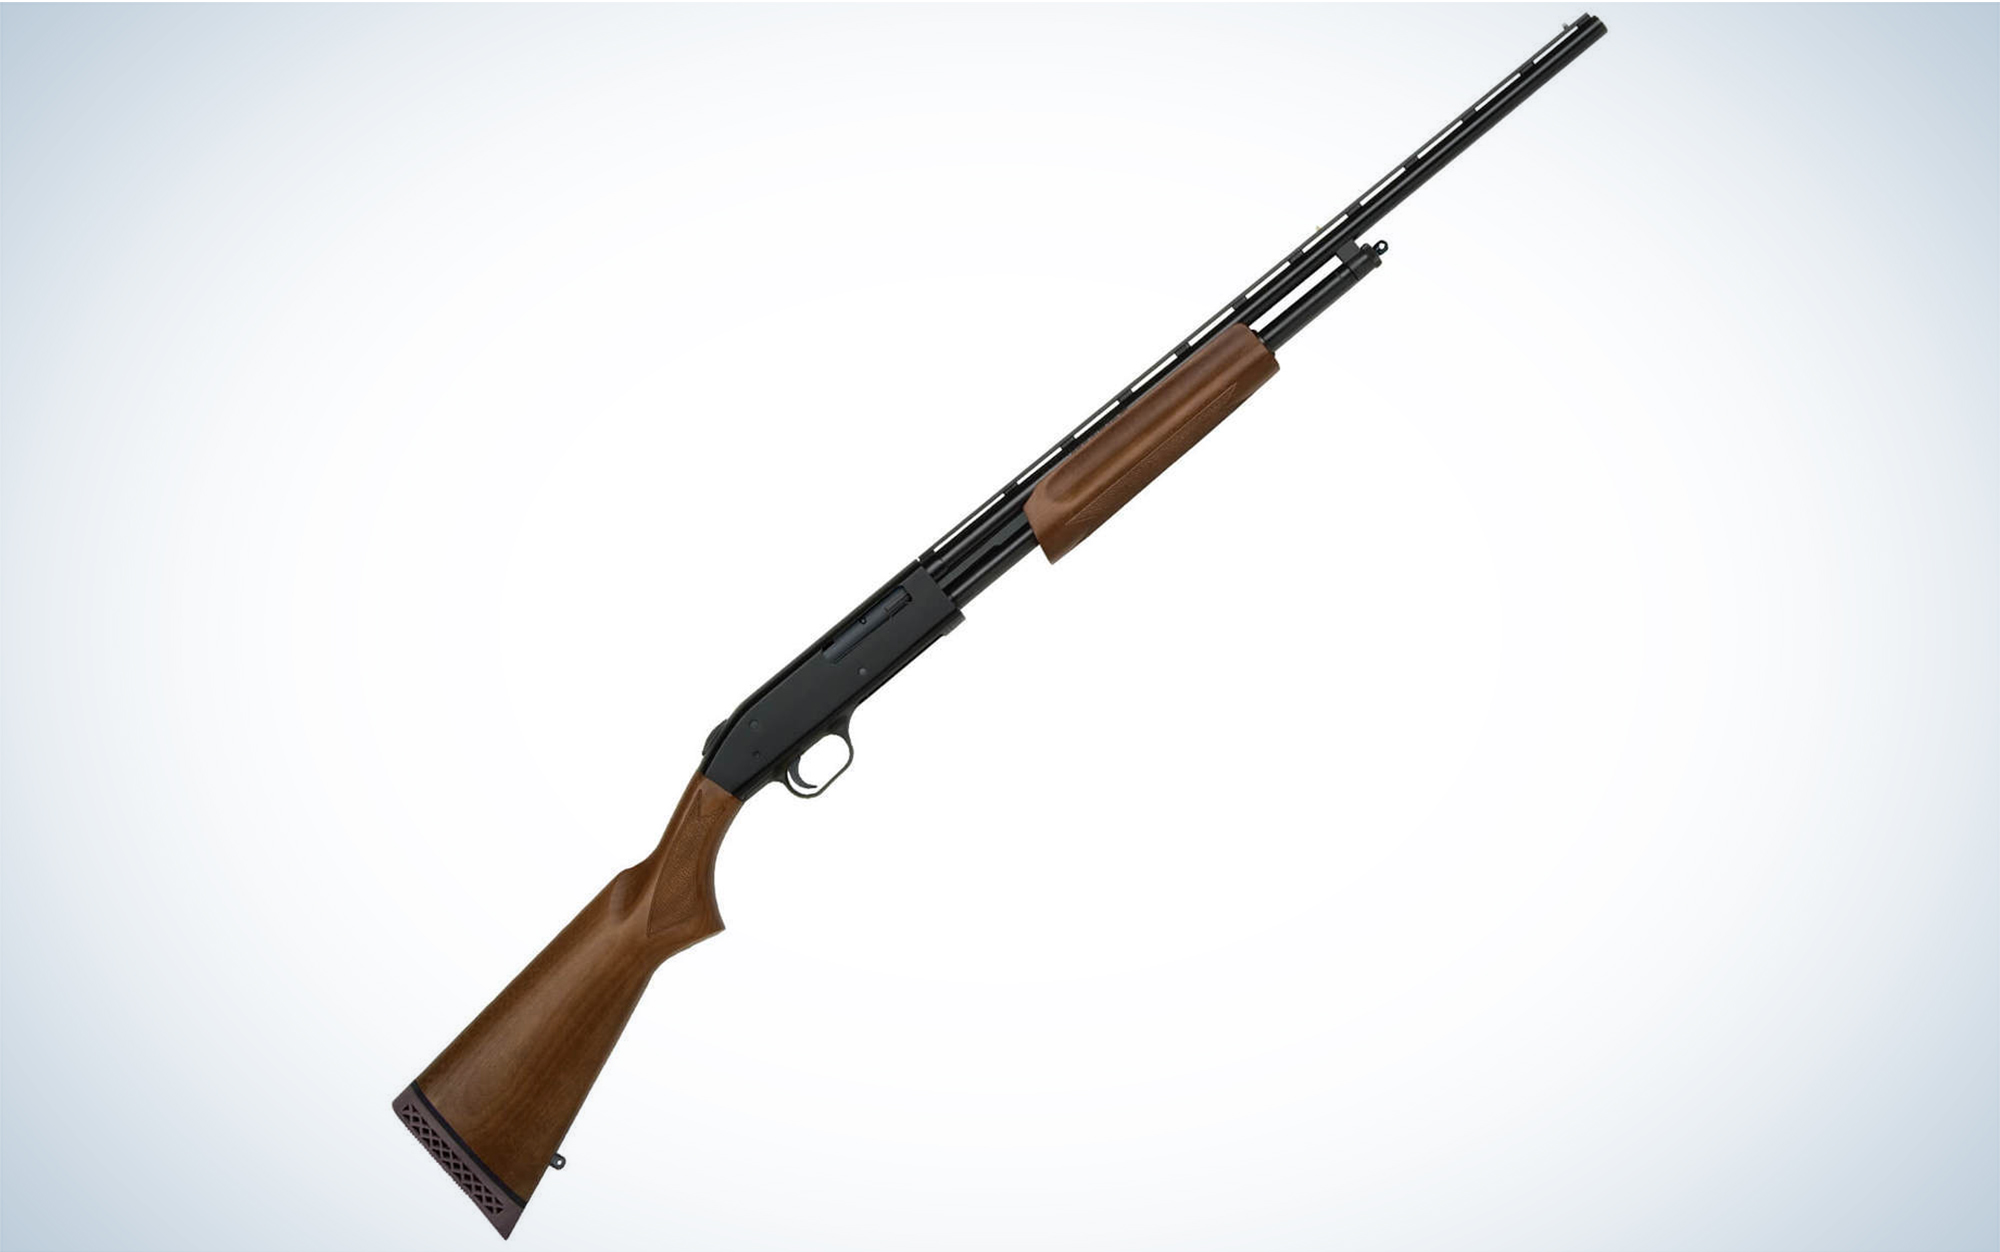 The Mossberg 500 .410 is one of the best duck hunting shotguns.